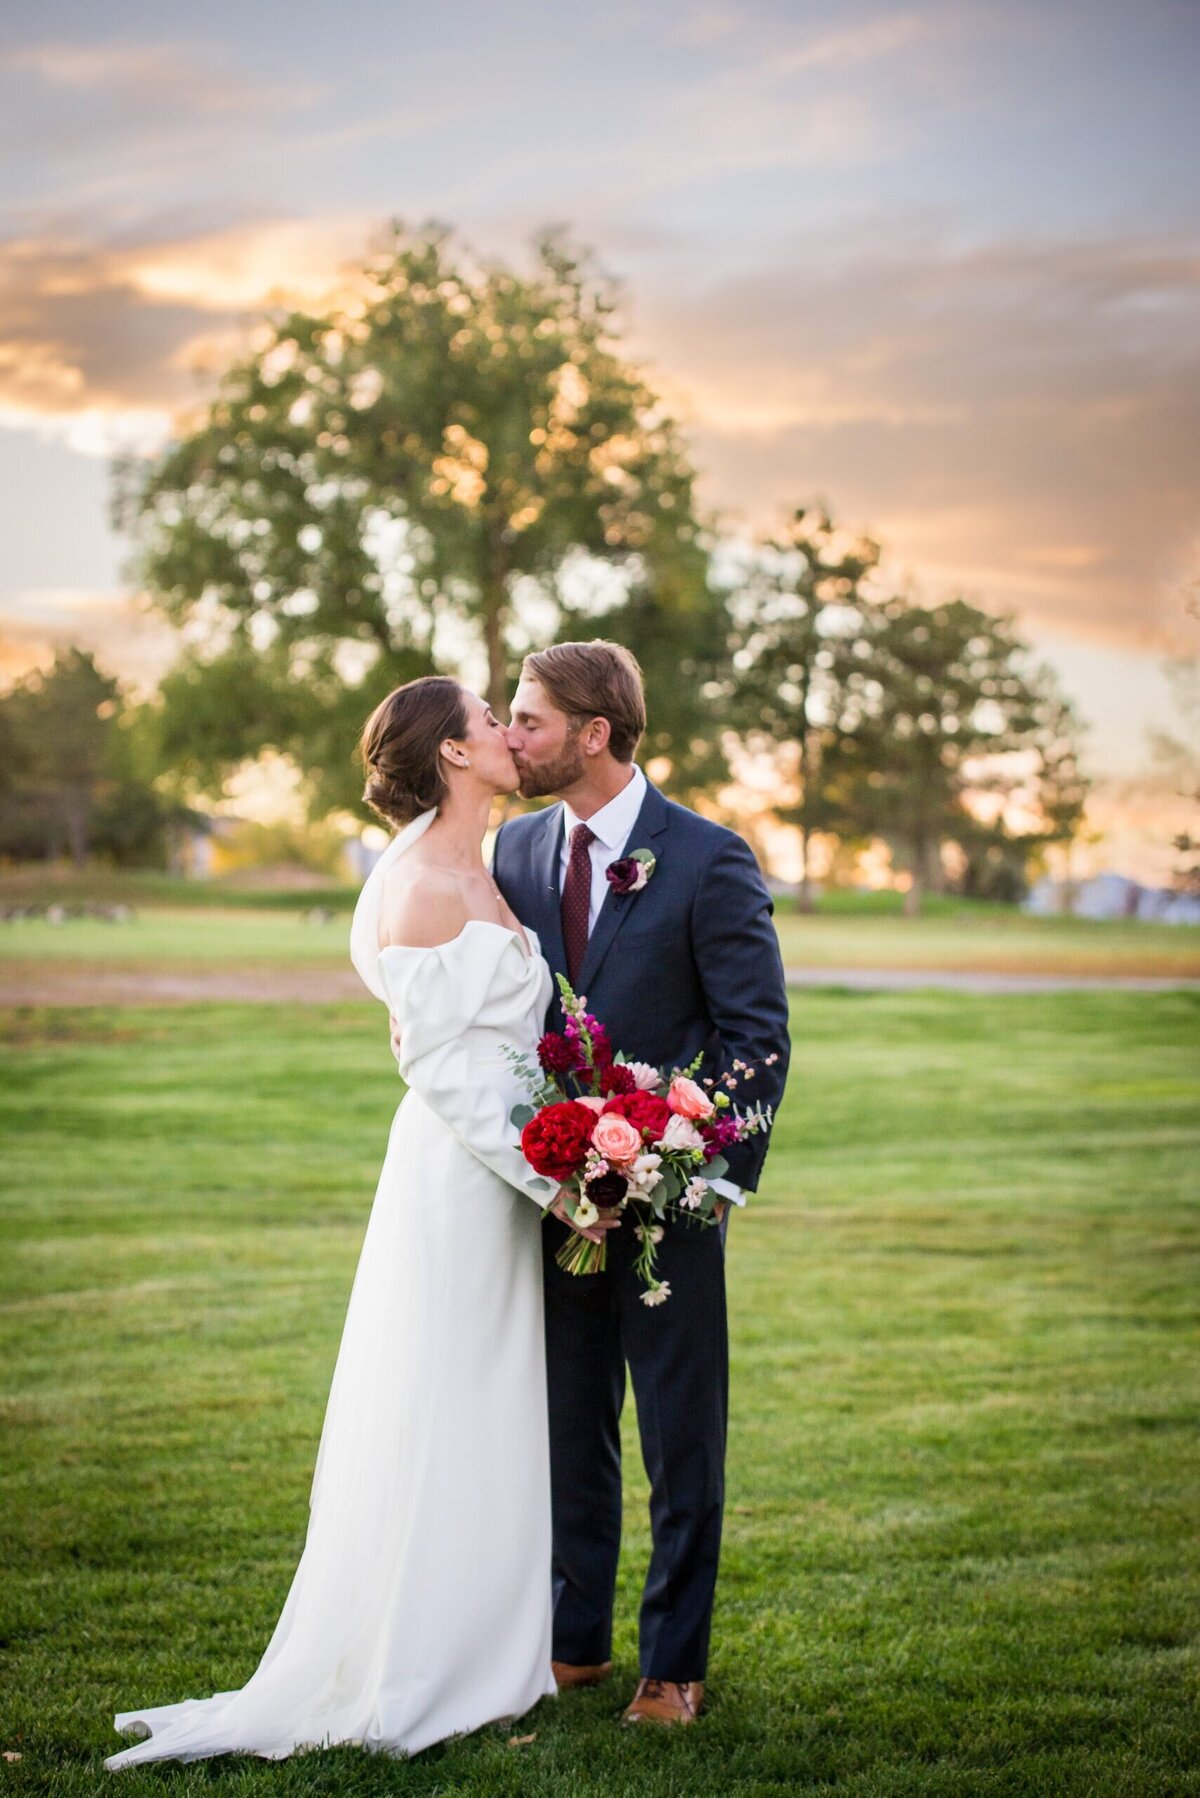 A bride and groom share a kiss at golden hour at The Barn at Raccoon Creek in Denver, Colorado.